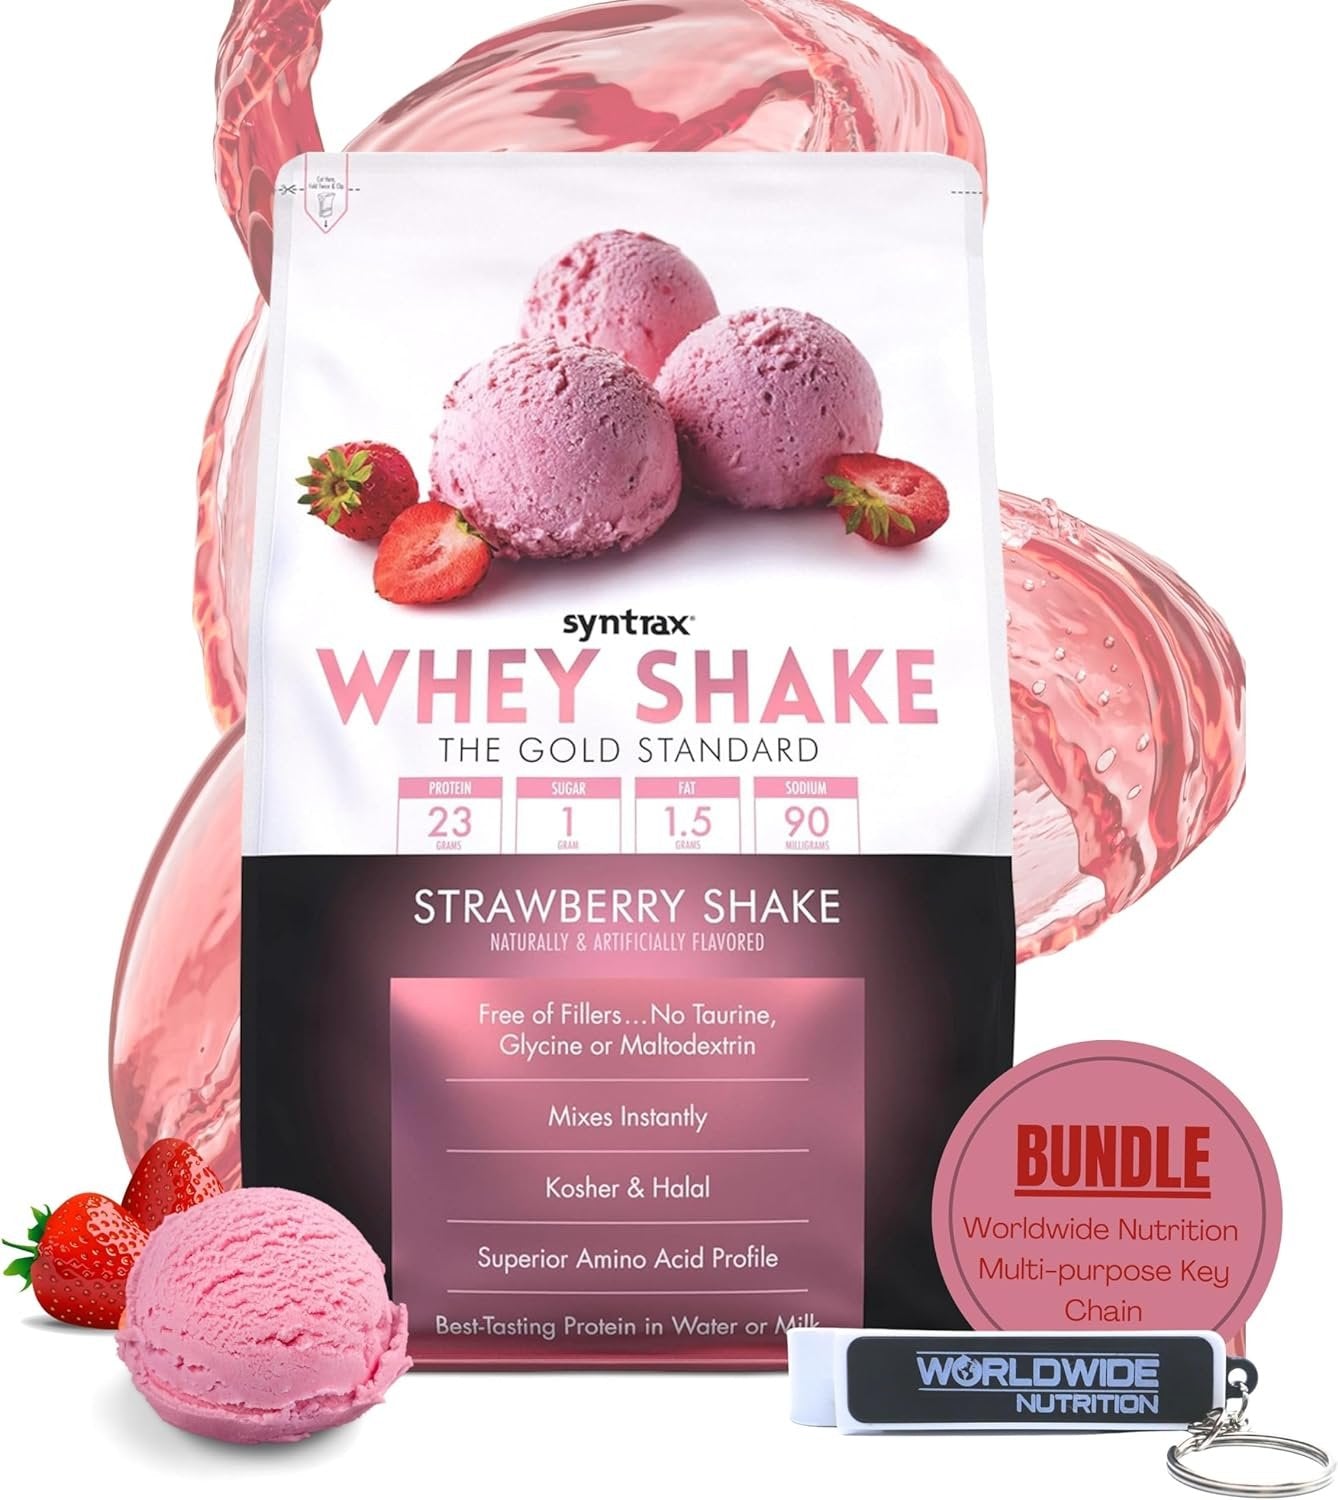 Syntrax Bundle, 2 Items Whey Shake Strawberry Shake Native Grass-Fed Wholesome Denatured Whey Protein Concentrate with Glutamine Peptides 2 Pounds with Worldwide Nutrition Keychain